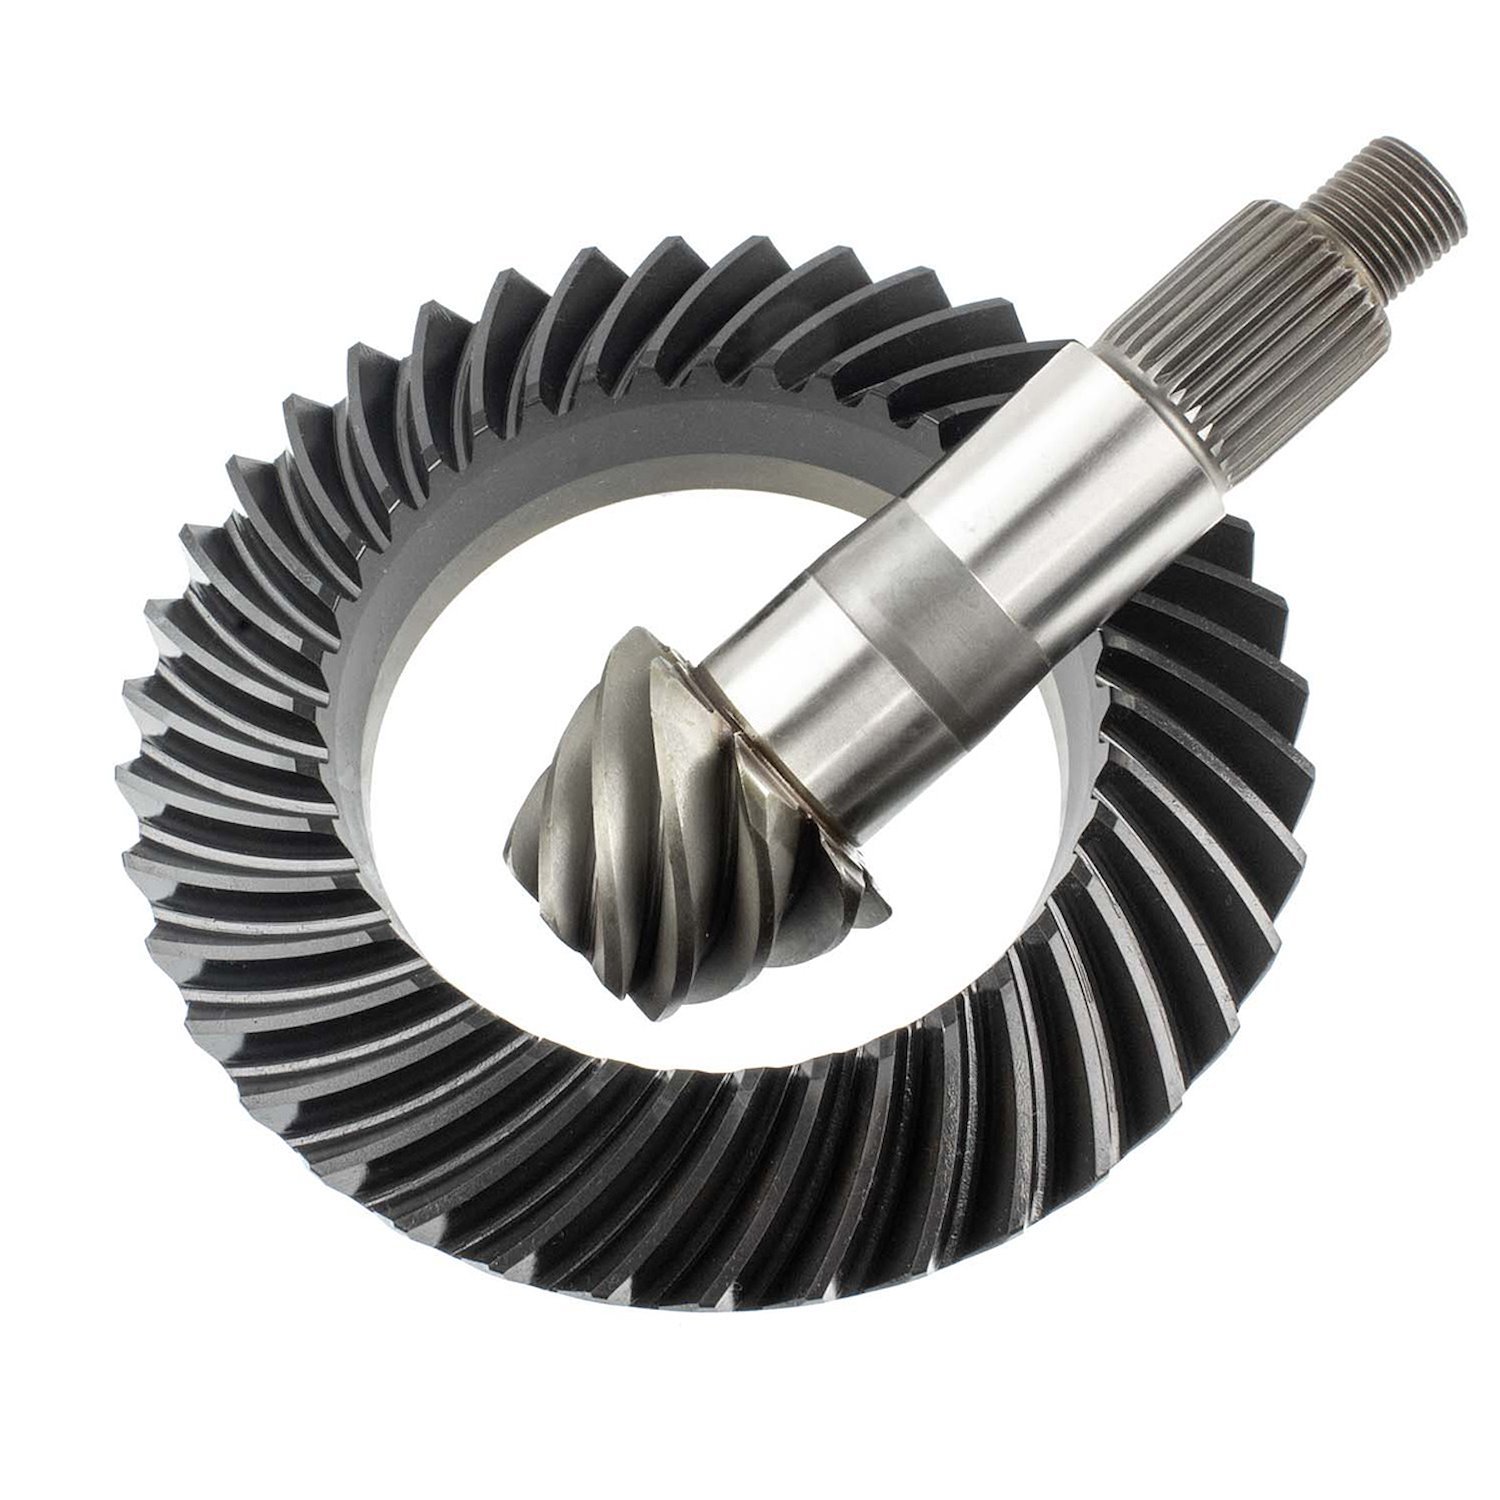 Ring & Pinion Gears for Jeep Wrangler JL